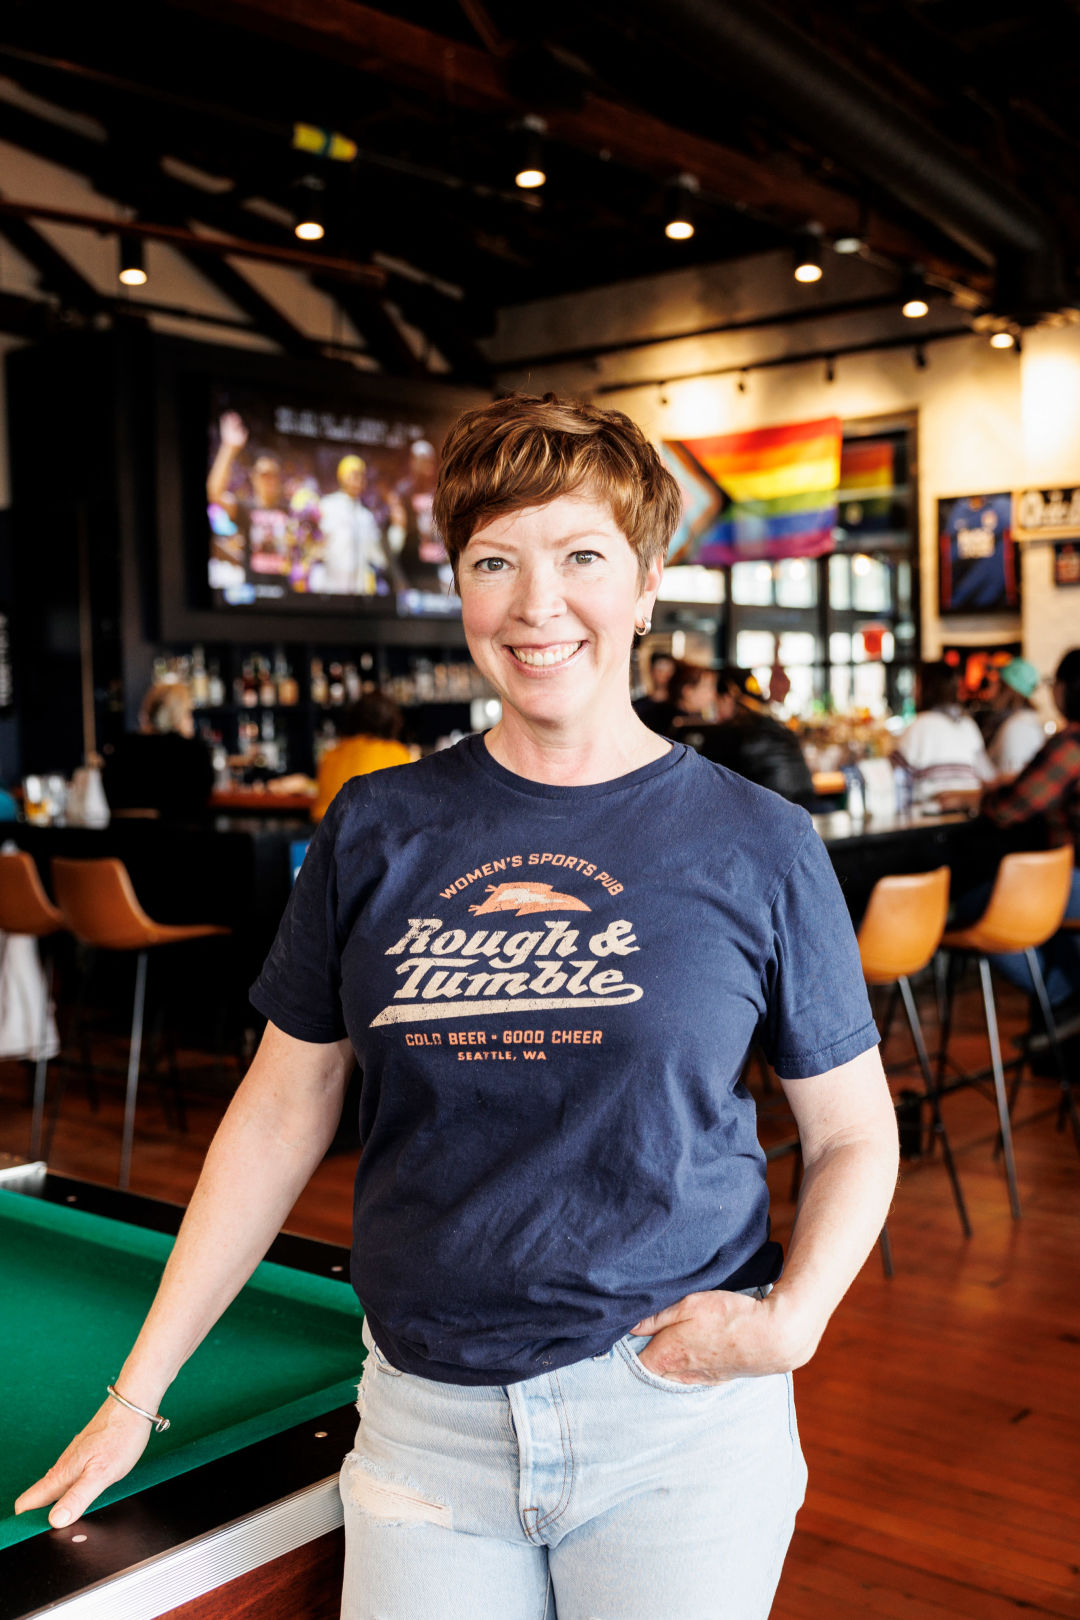 First look at 'The Sports Bra' Women's Sports Bar with an extensive taplist  — New School Beer + Cider